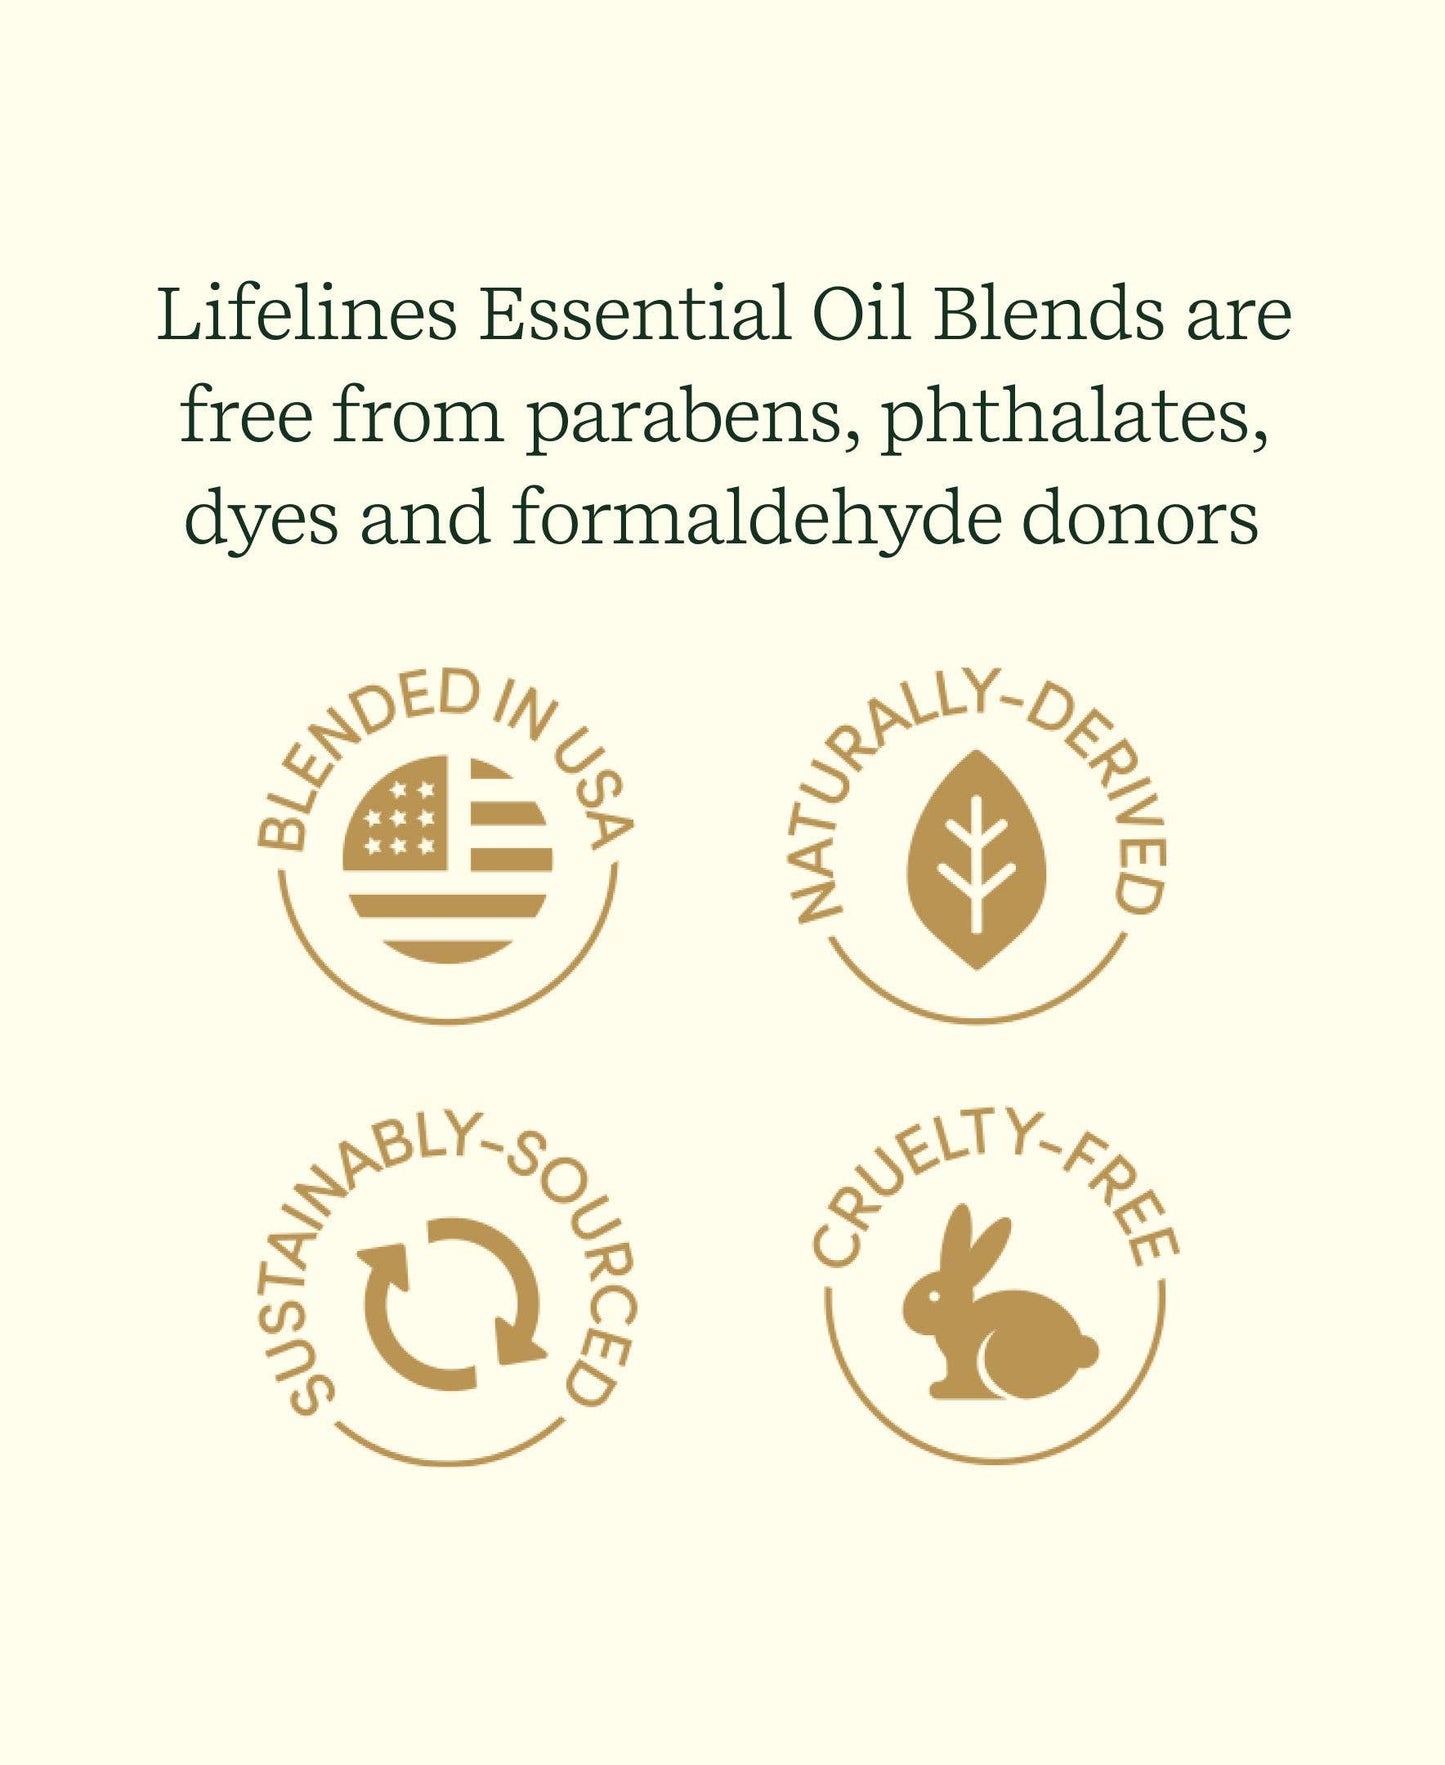 Lifelines Pen Diffuser with Essential Oil Blends -  Walk in the Woods